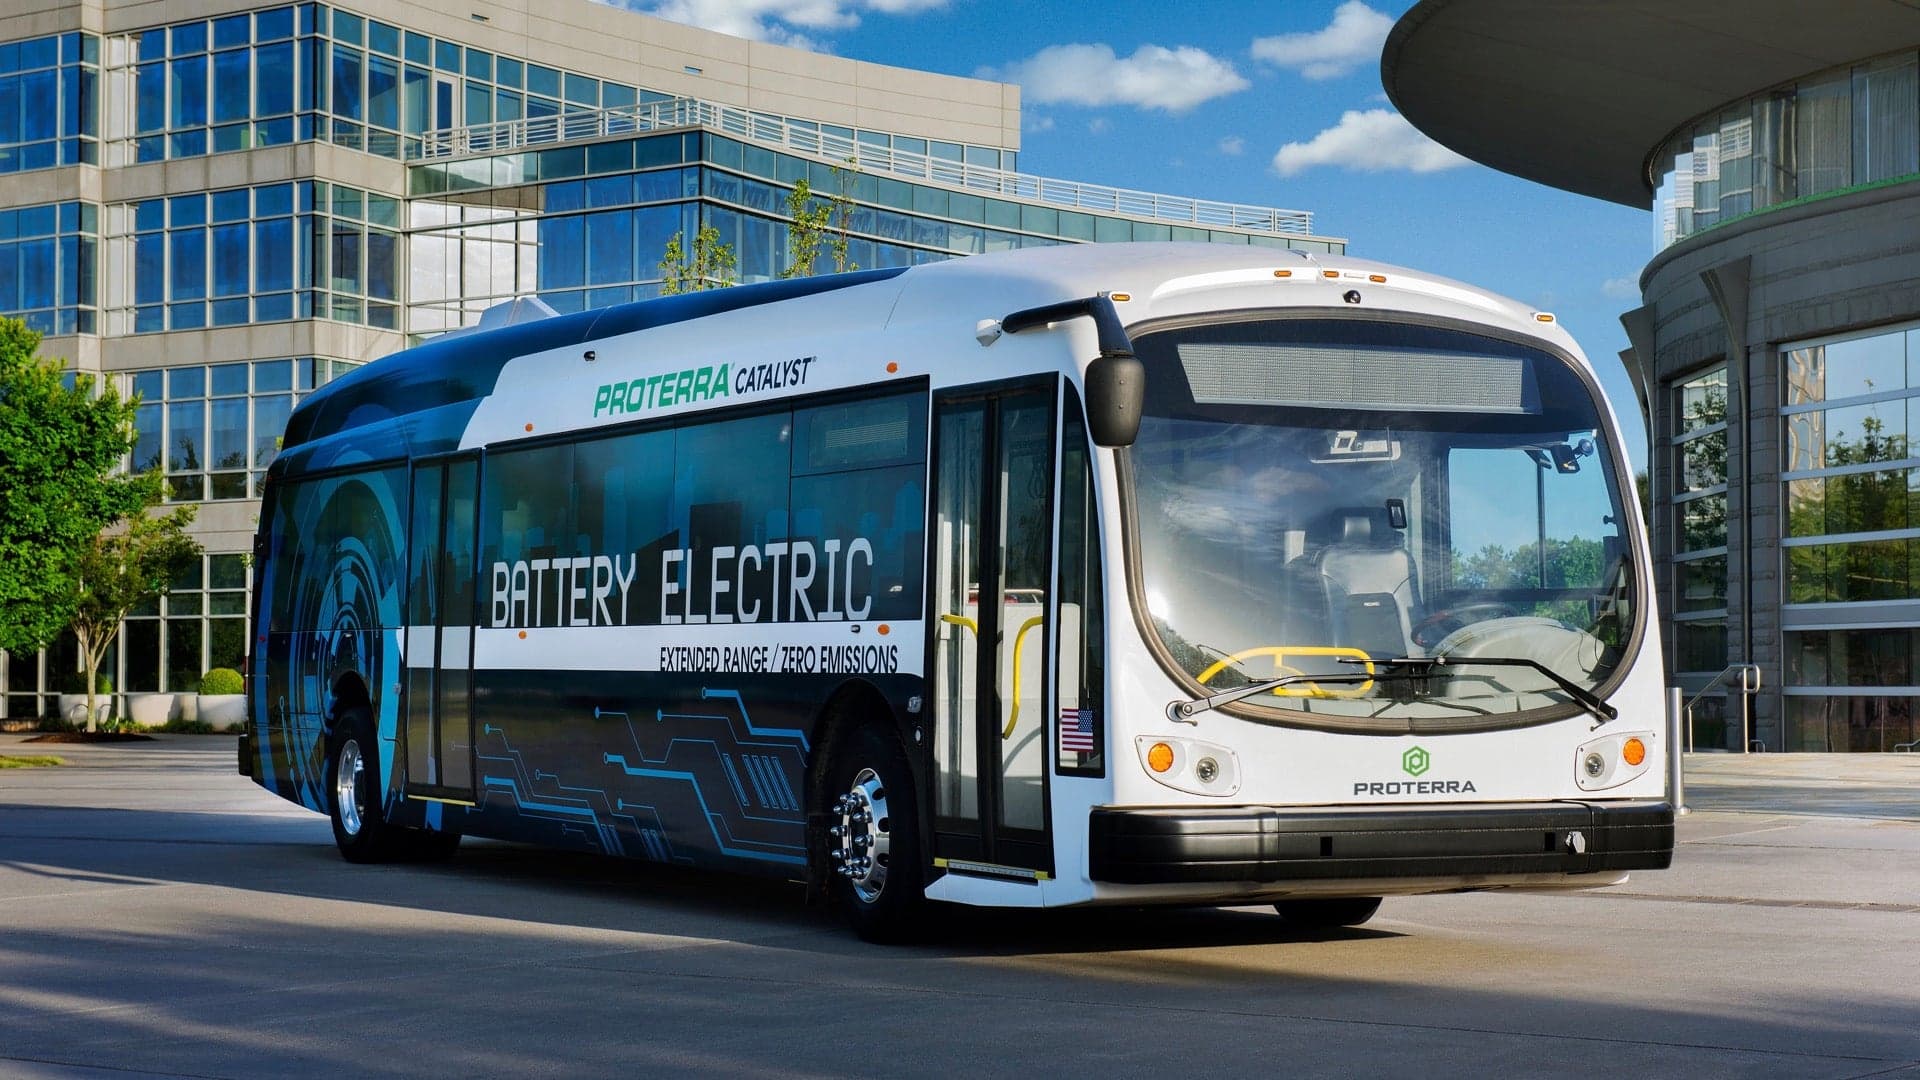 Electric Bus Builder Proterra’s Autonomous Systems Will Leave Room for Human Drivers